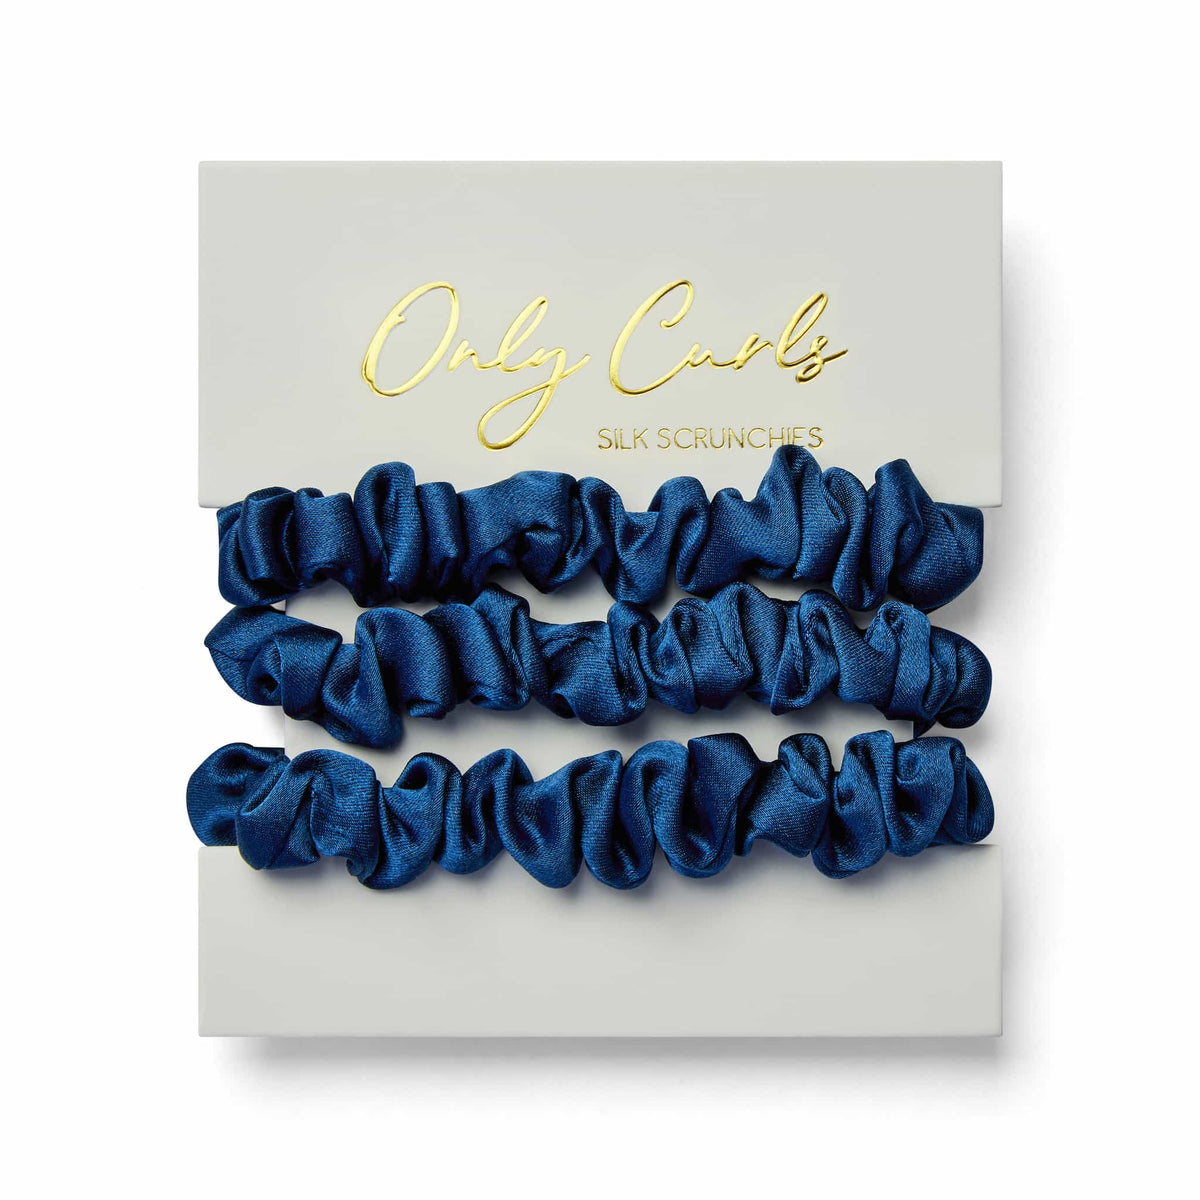 Only Curls Silk Scrunchies - Teal Mini - Only Curls